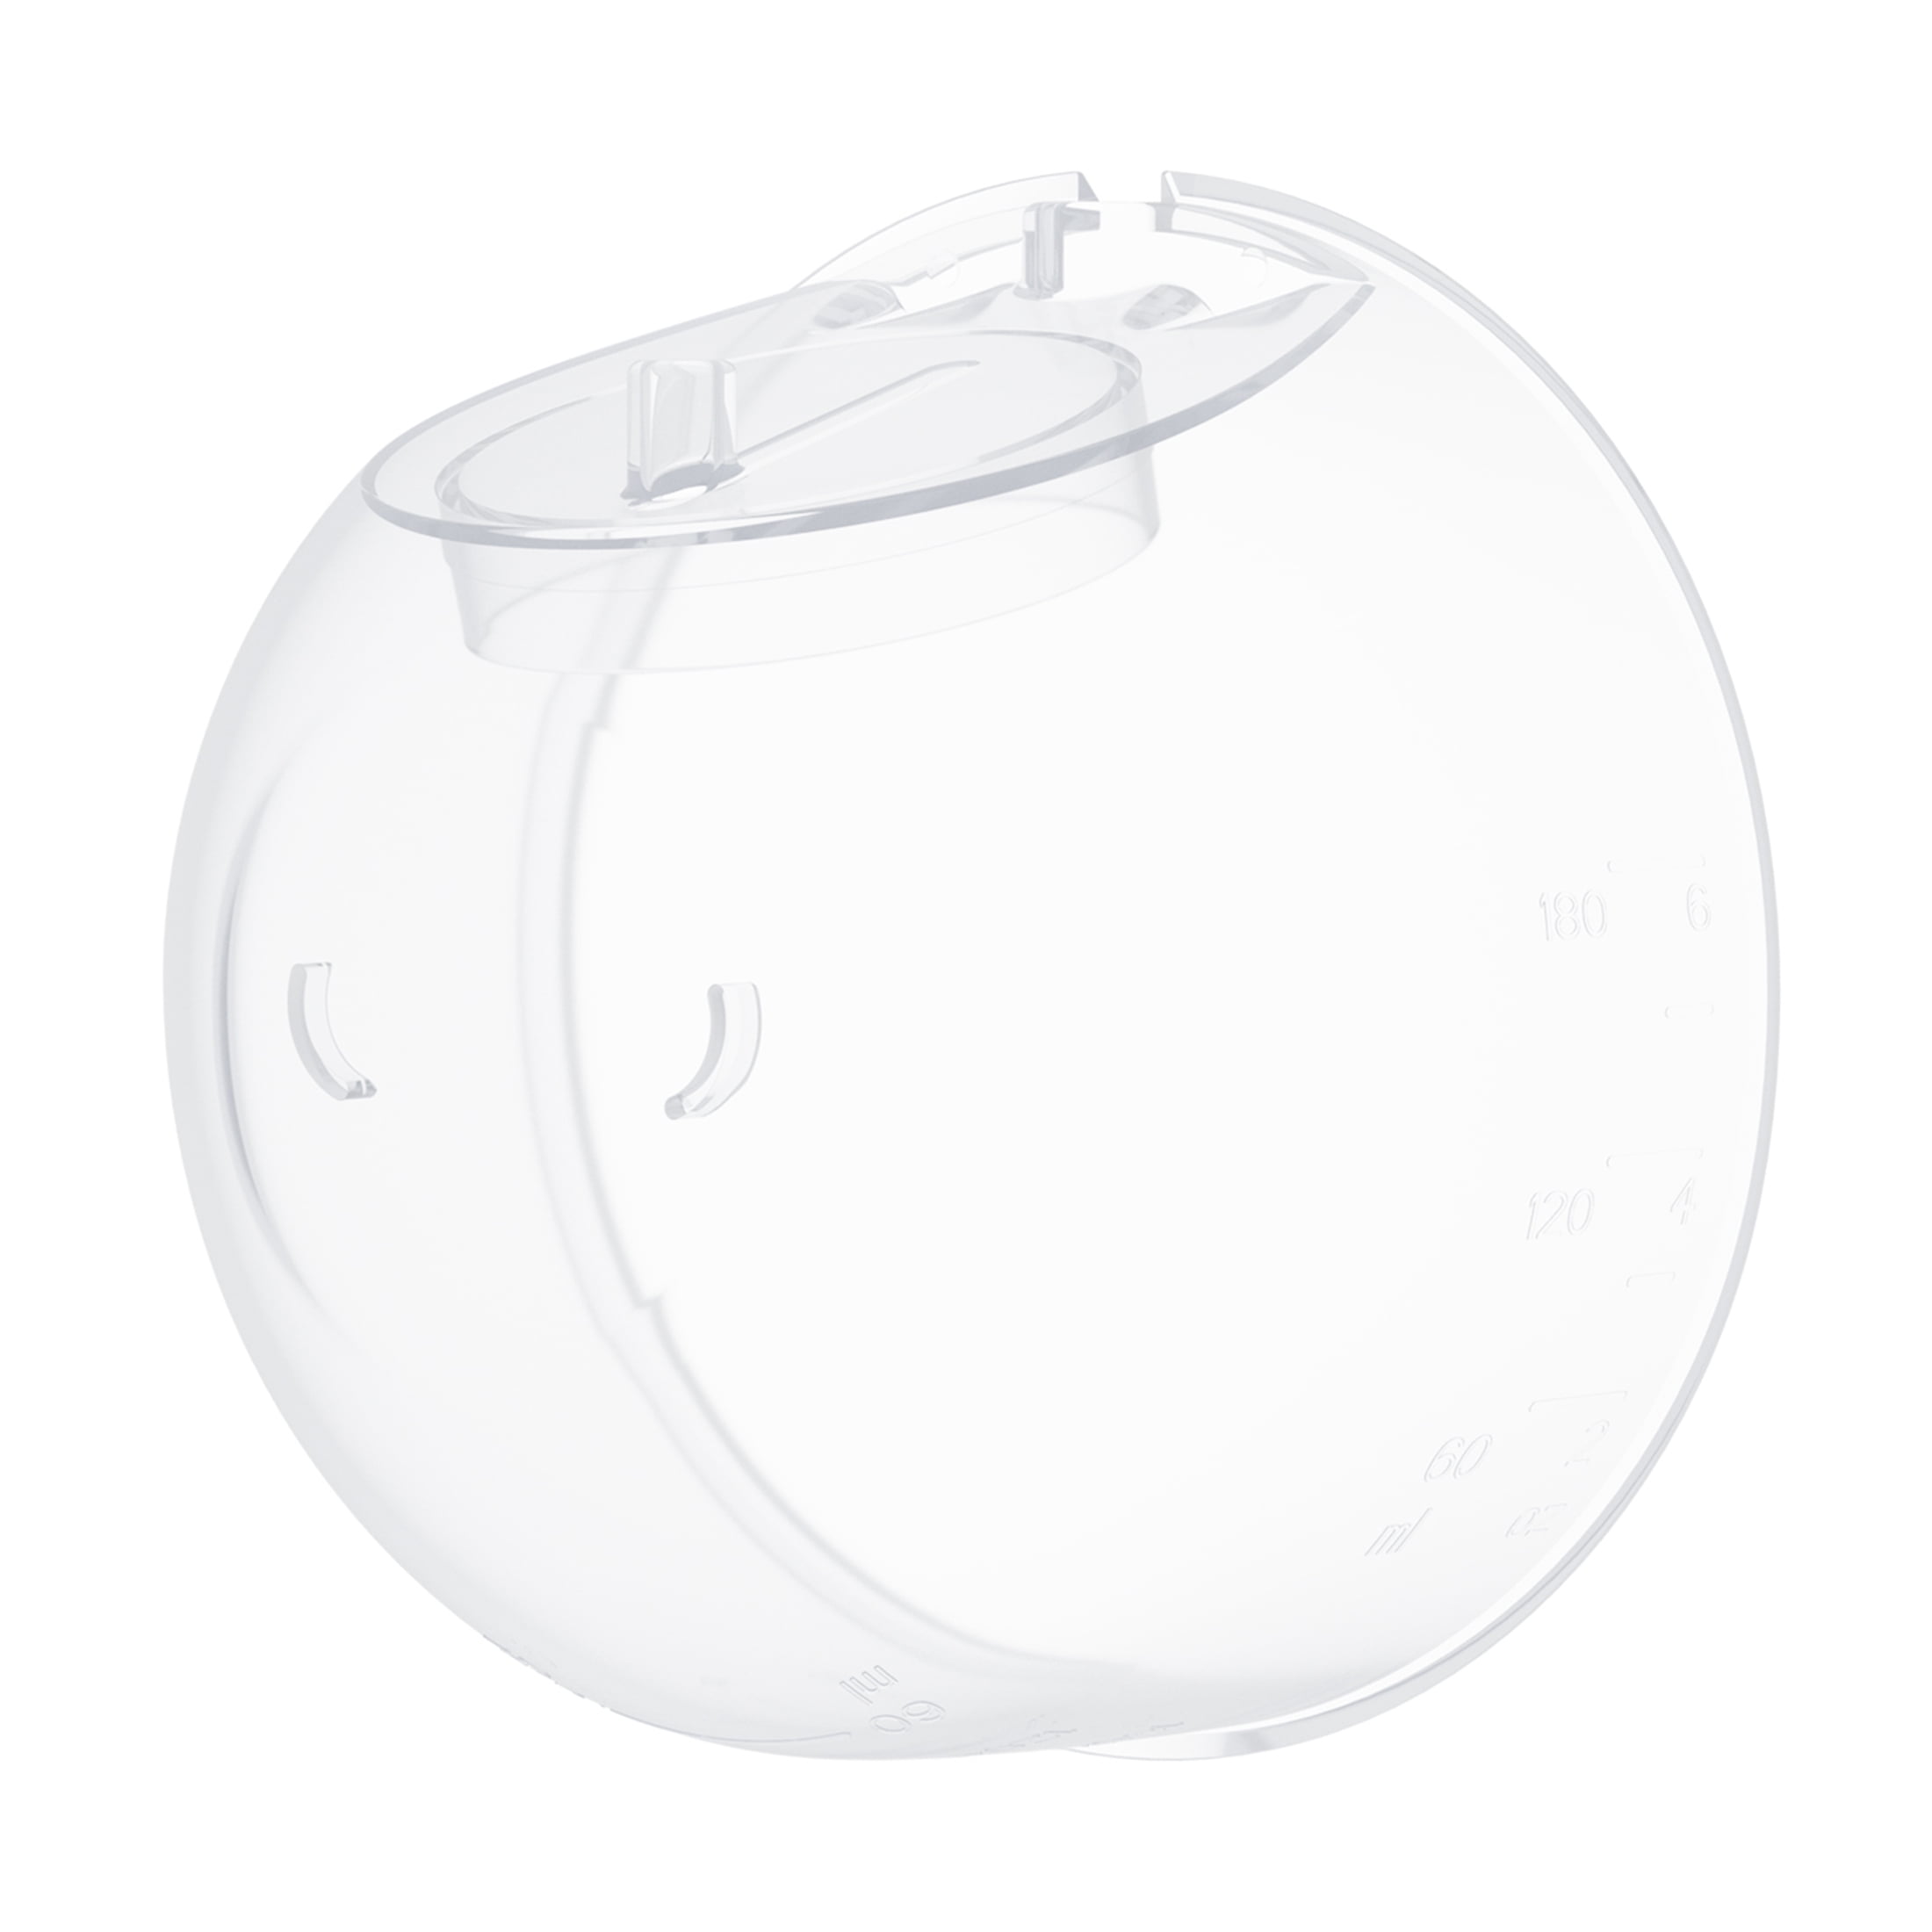 Momcozy launches the S12 Pro, a breast pump made for